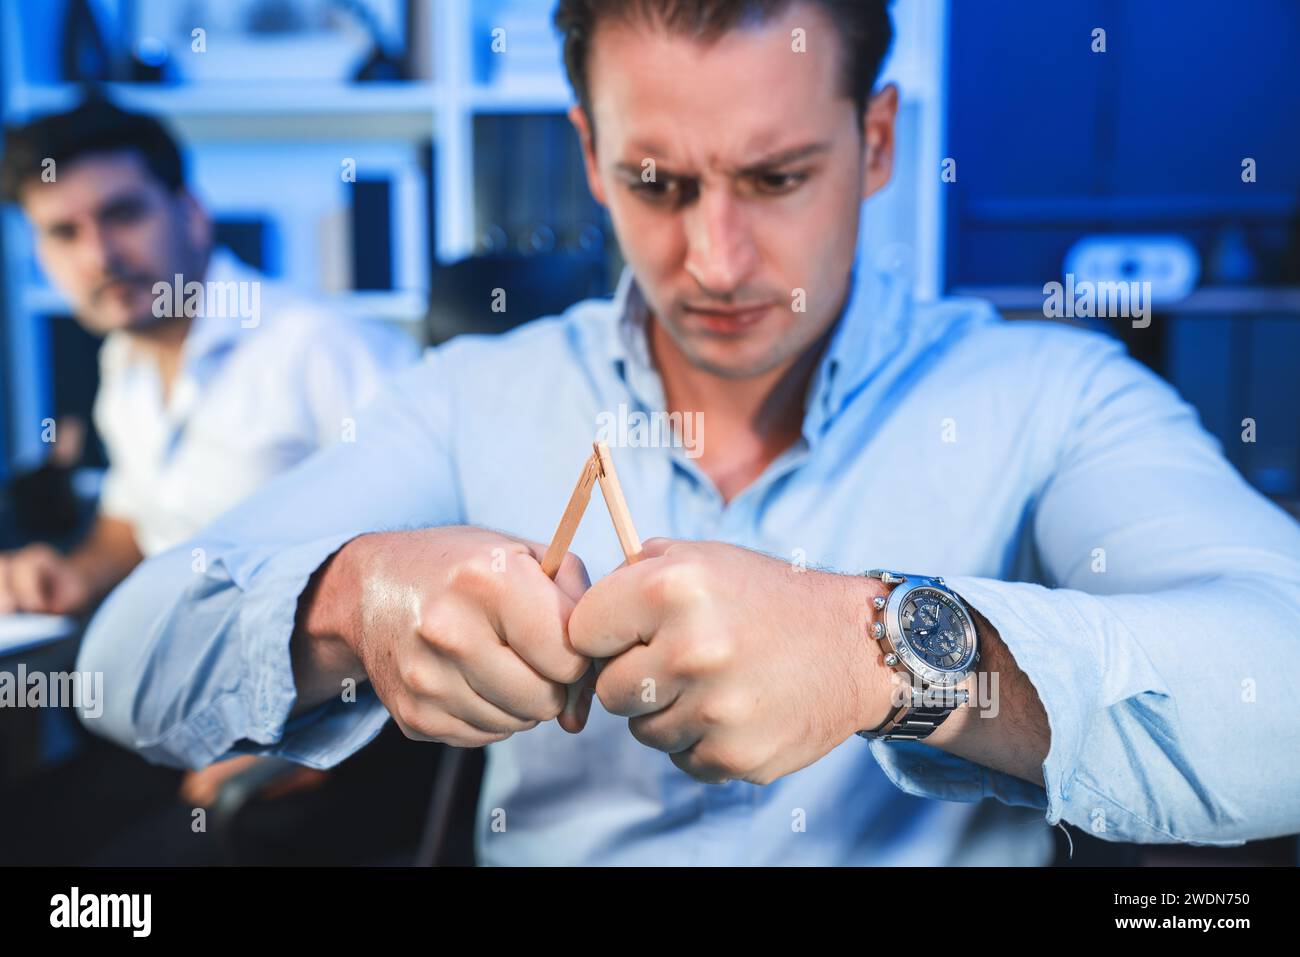 Stressful burnout of businessman destroying pencil for venting emotion in overwork load at night time, supported by business partner to solve issue Stock Photo